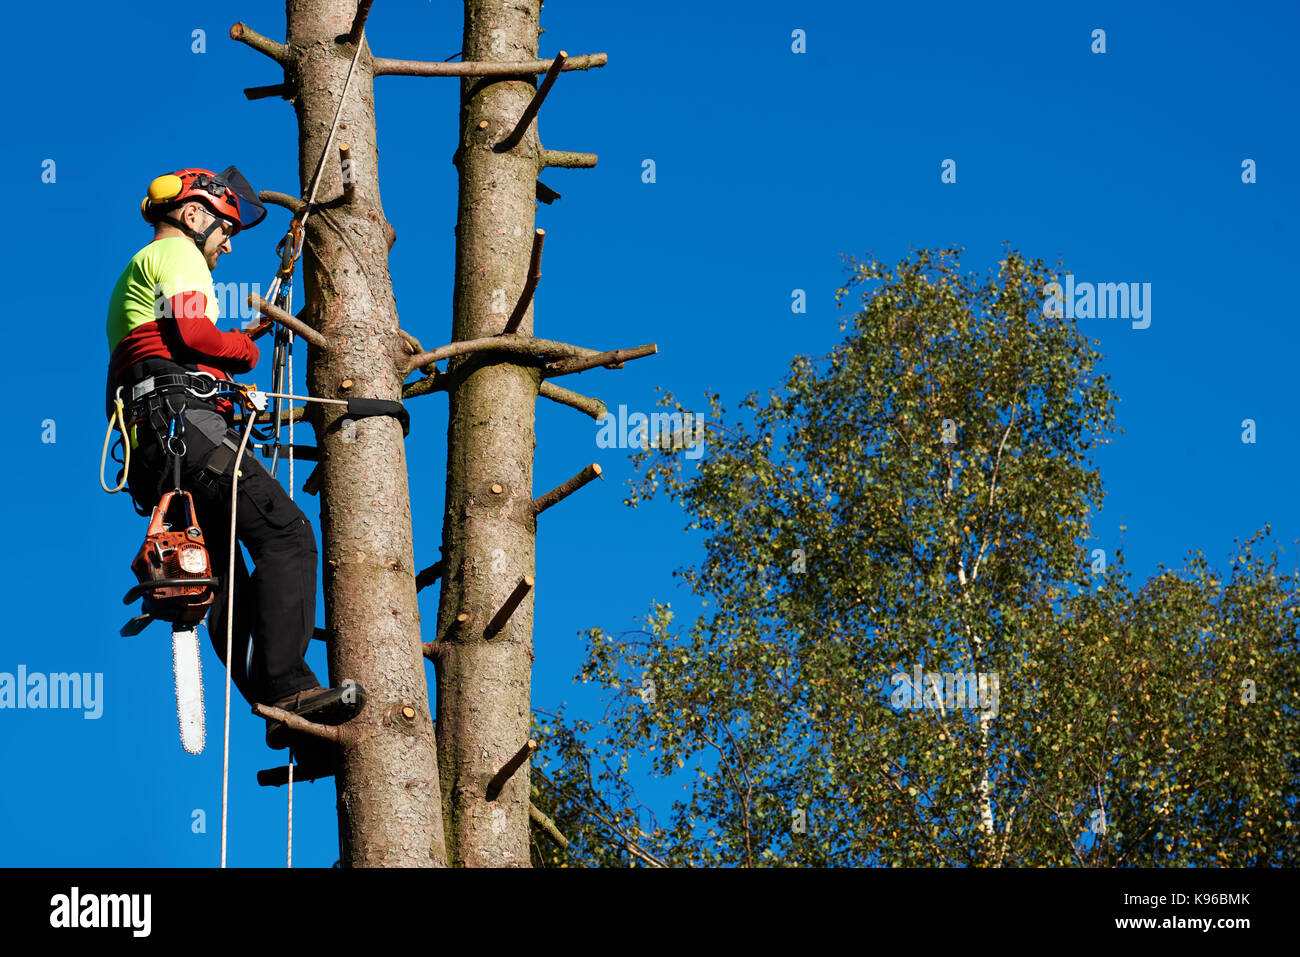 Lumberjack with saw and harness climbing a tree Stock Photo